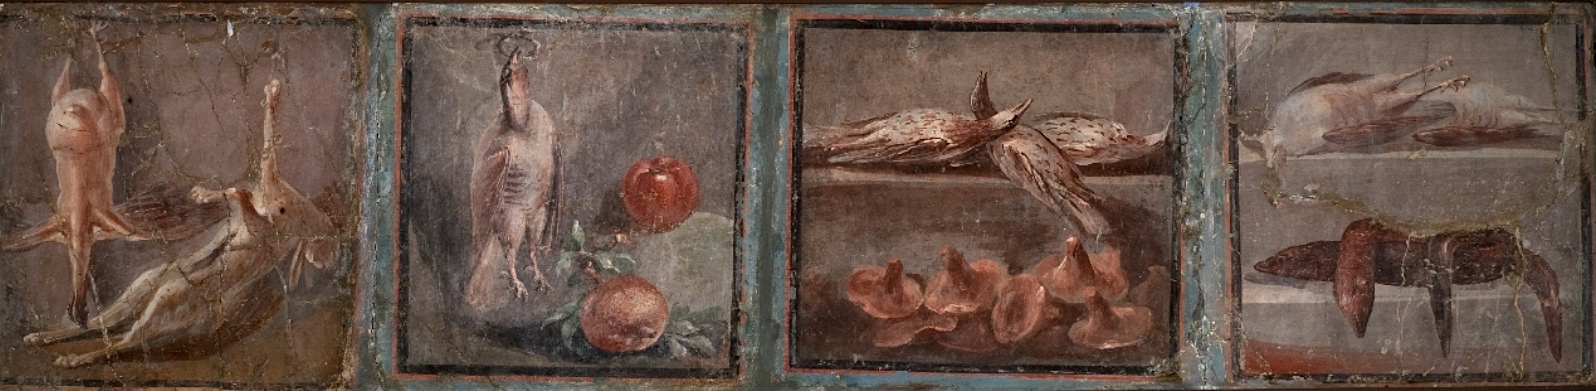 Stil-Life with Chicken and Hare (right), Still Life with Partridge, Pomegranate and Apple (second from let), Still Life with Thrushes and Mushrooms (third from left), Still-Life with Partridges and Eels (right), Fourth Style wall painting from Herculaneum, Italy, c. 62-69 C.E., fresco, 14 x 13 1/2 inches (Archaeological Museum, Naples)